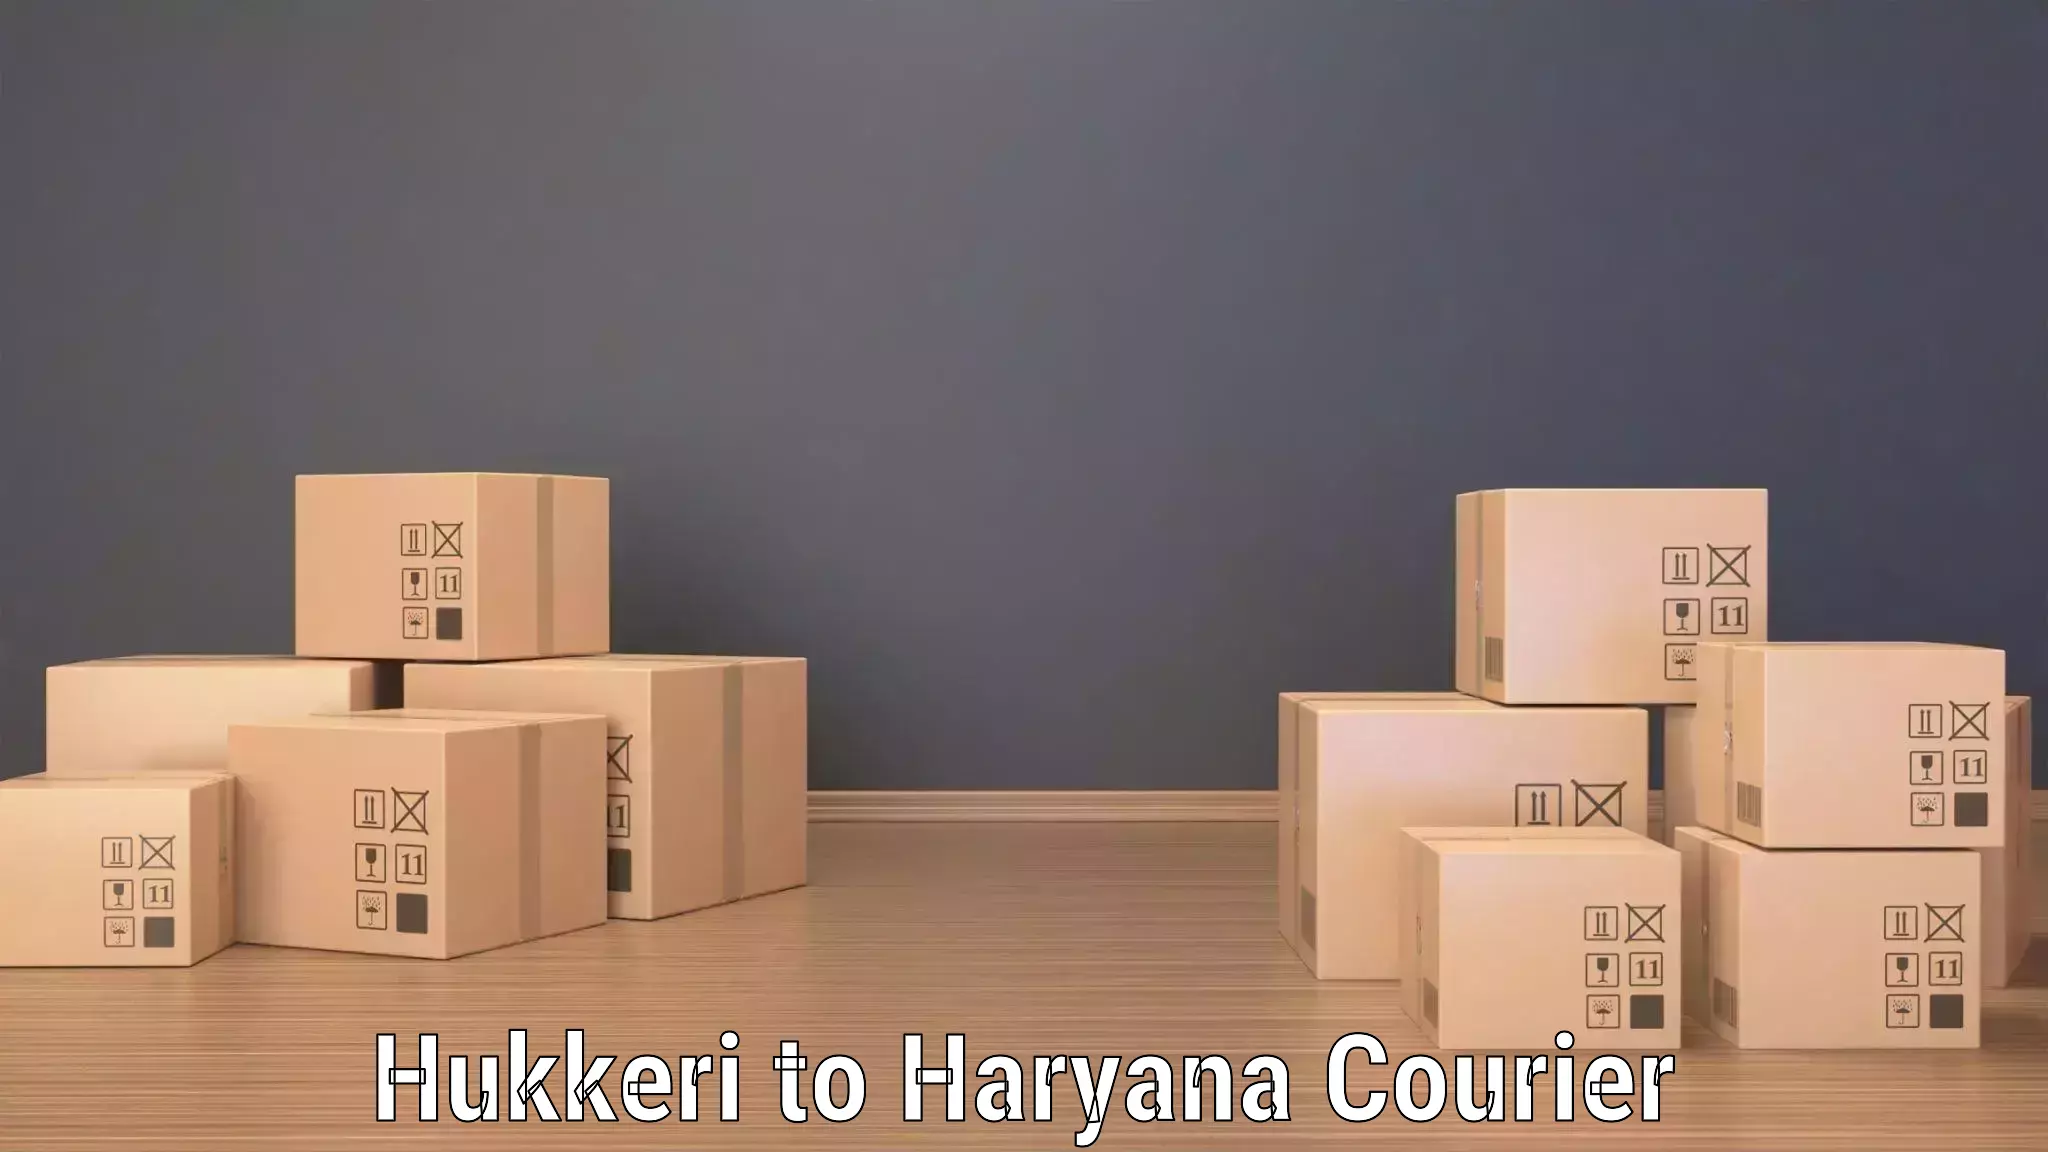 Global courier networks Hukkeri to NCR Haryana